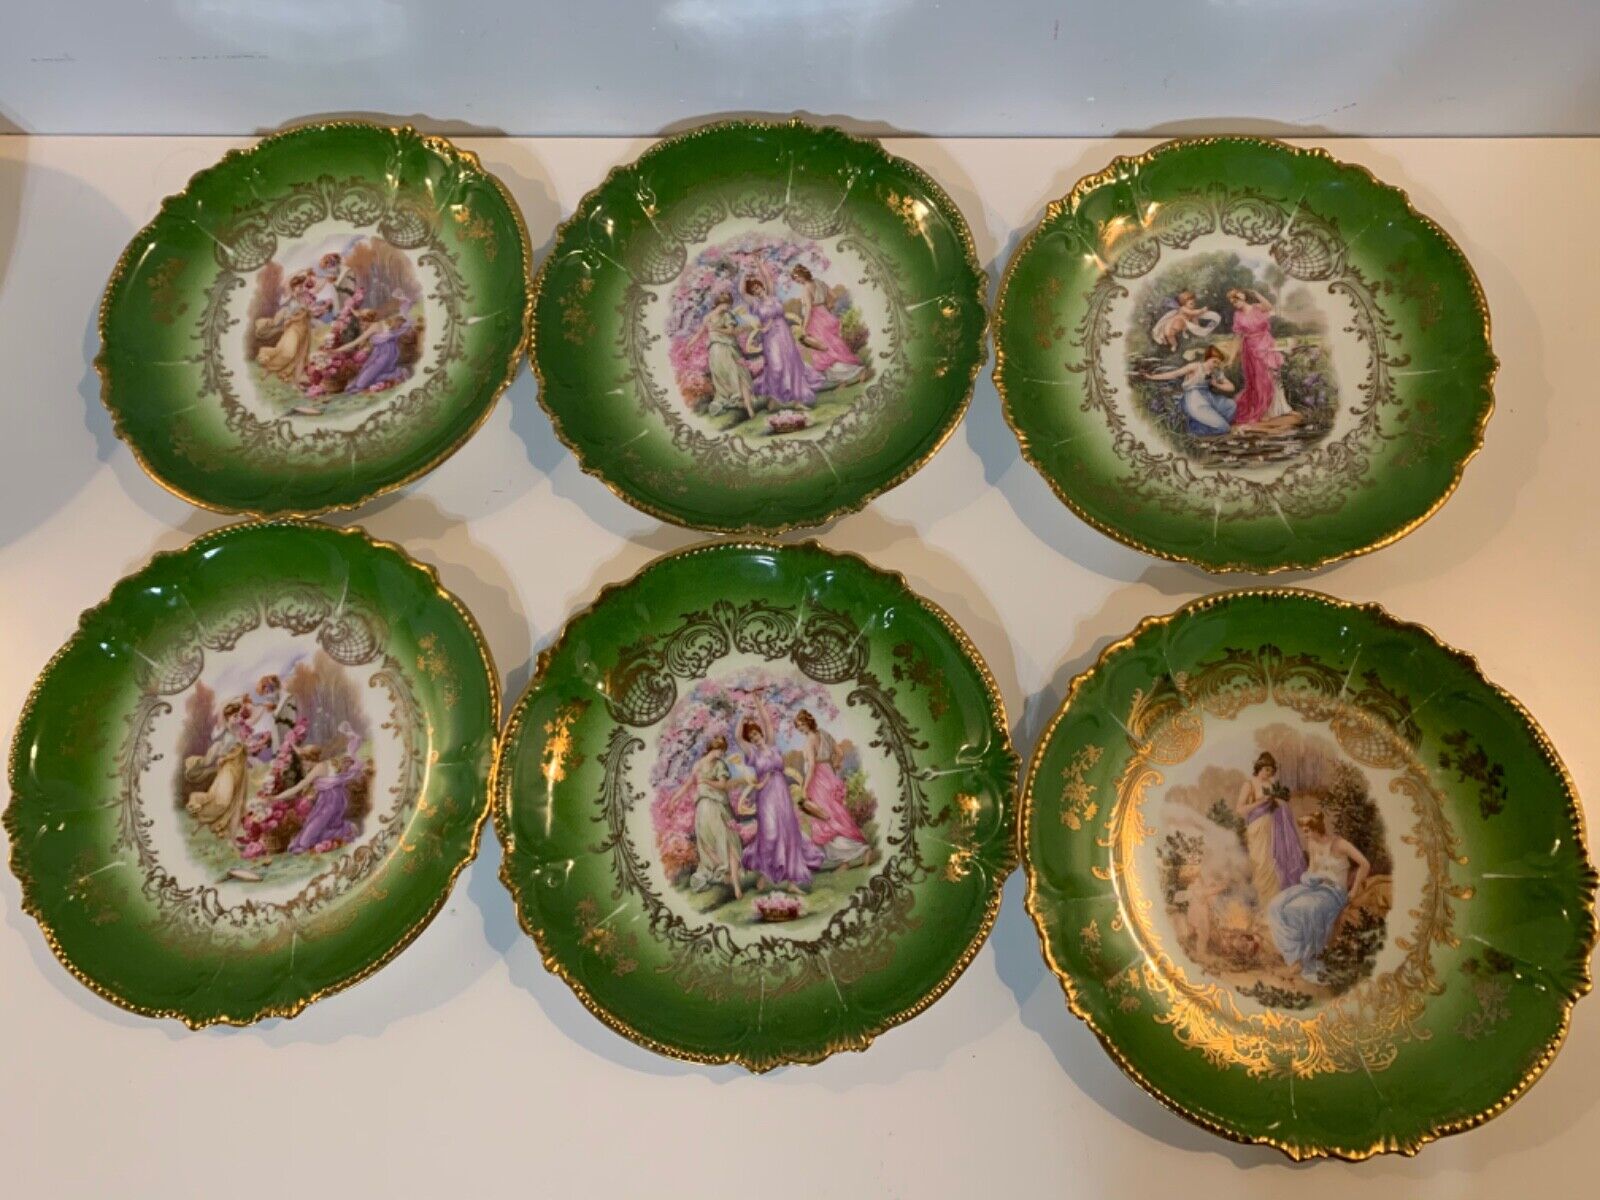 Antique Royal Bavaria RMB Porcelain with Three Muses and Green Rim Decorations